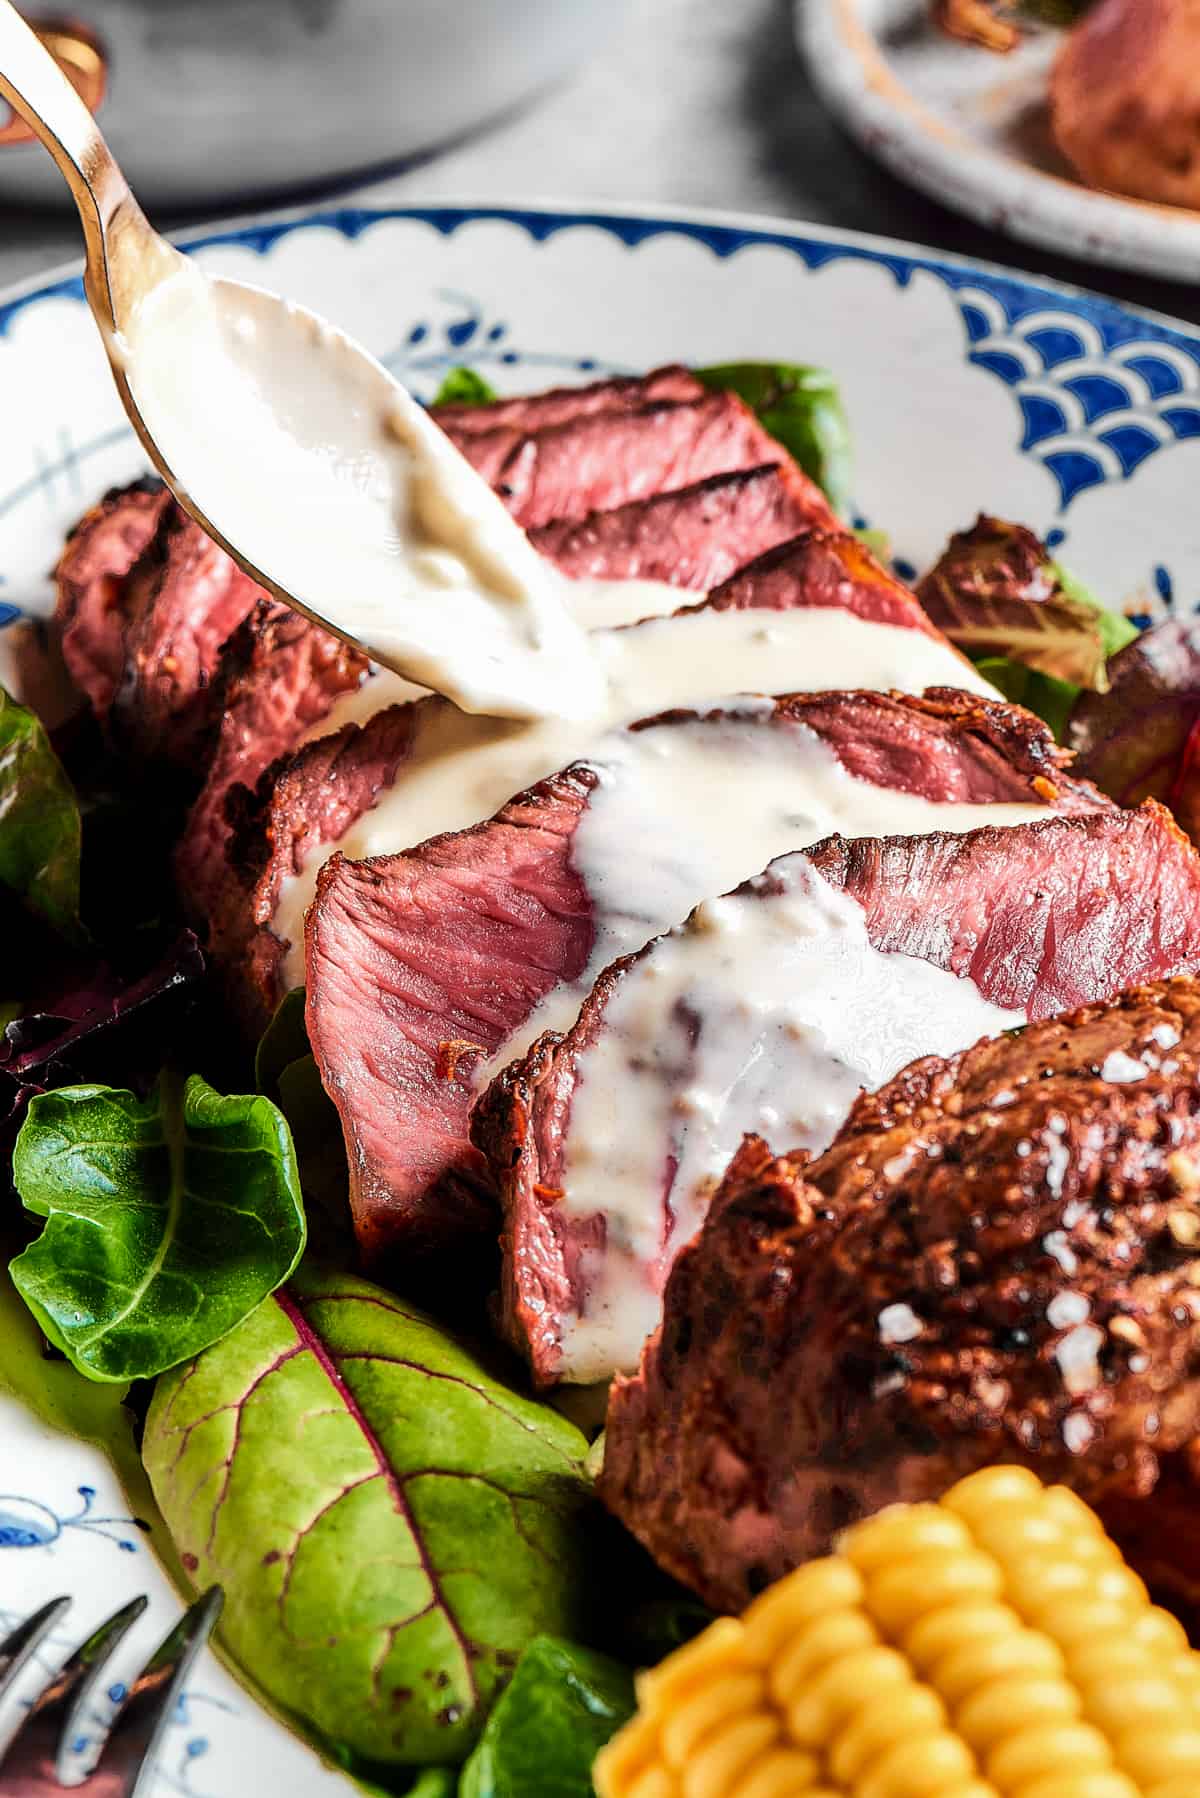 Steak slices with creamy sauce being spooned over the top.